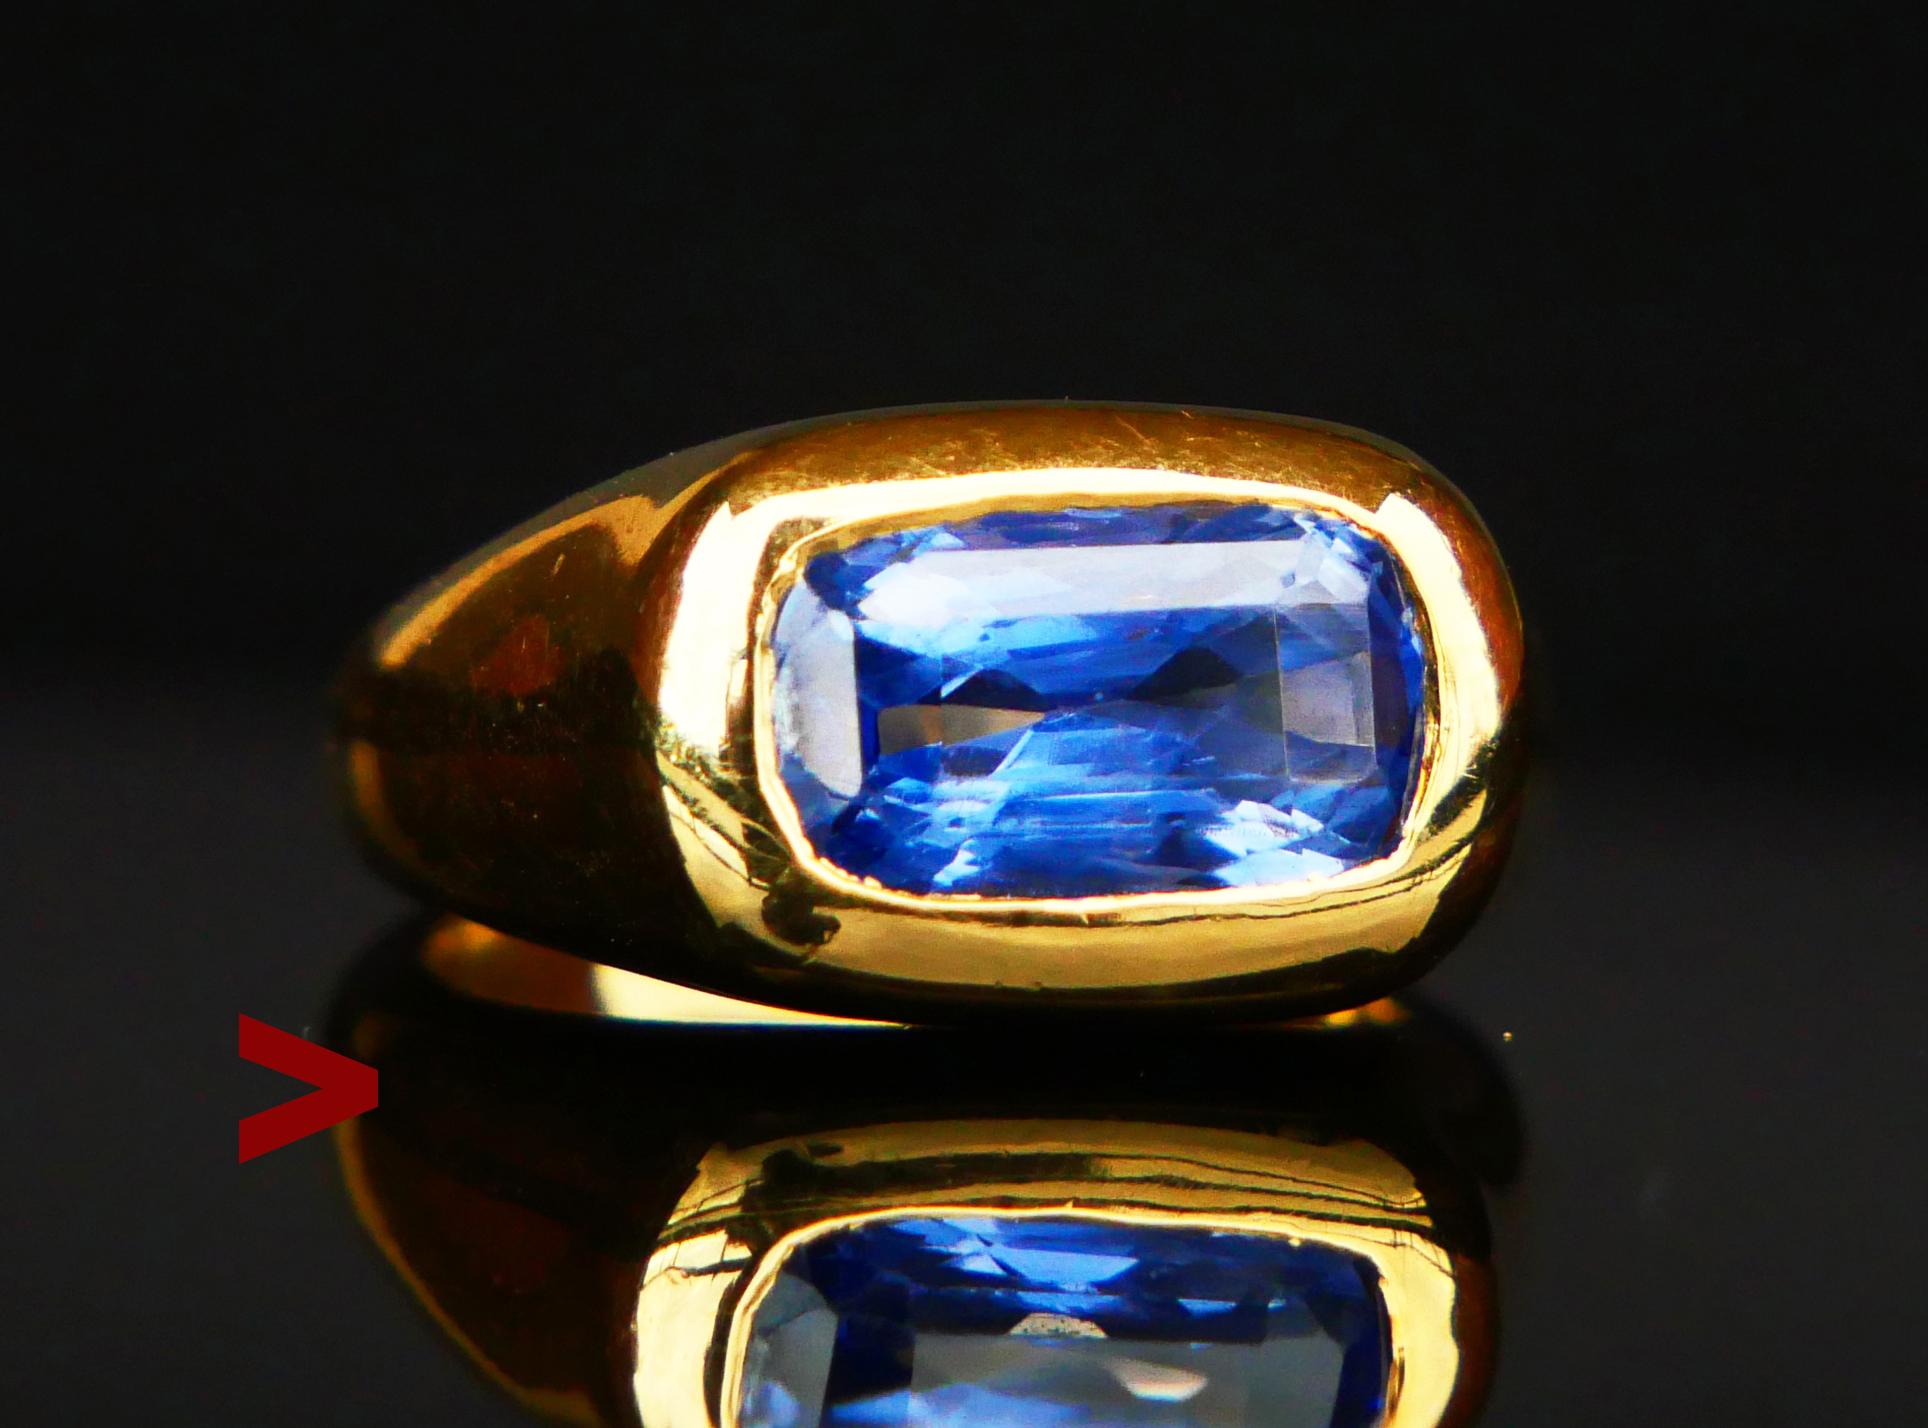 Ring for every day of unisex type in solid 18K Yellow Gold decorated with spectacular natural Blue Sapphire of lighter Blue / Cornflower color variety, emerald cut 10mm x 6 mm x 4.6 mm deep /ca 4ct. Stone demonstrates flaws and internal structures